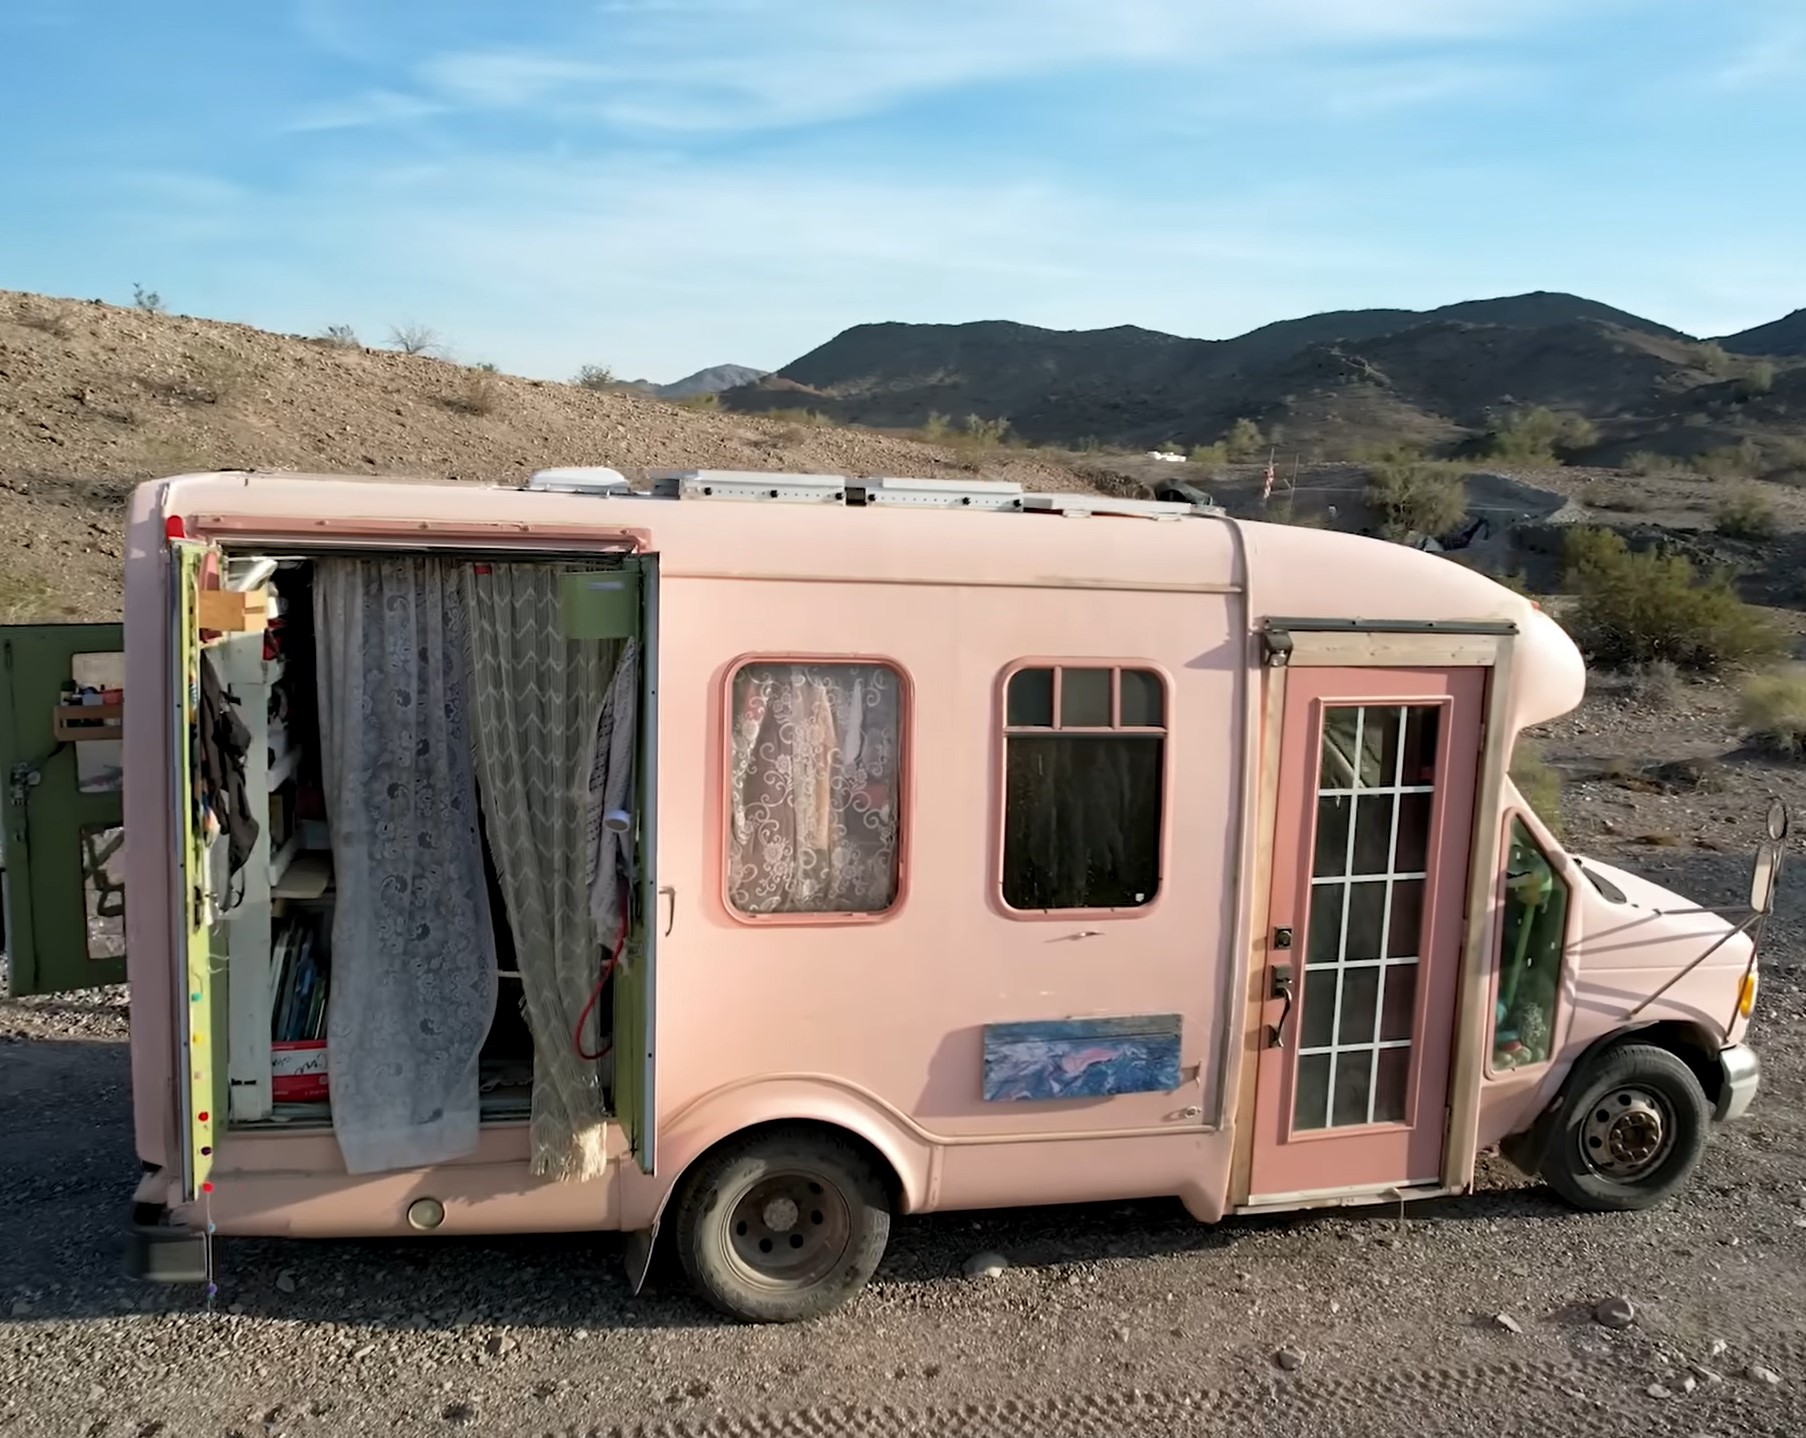 Outside view of Wilbur, Rita's pink bus tiny home.